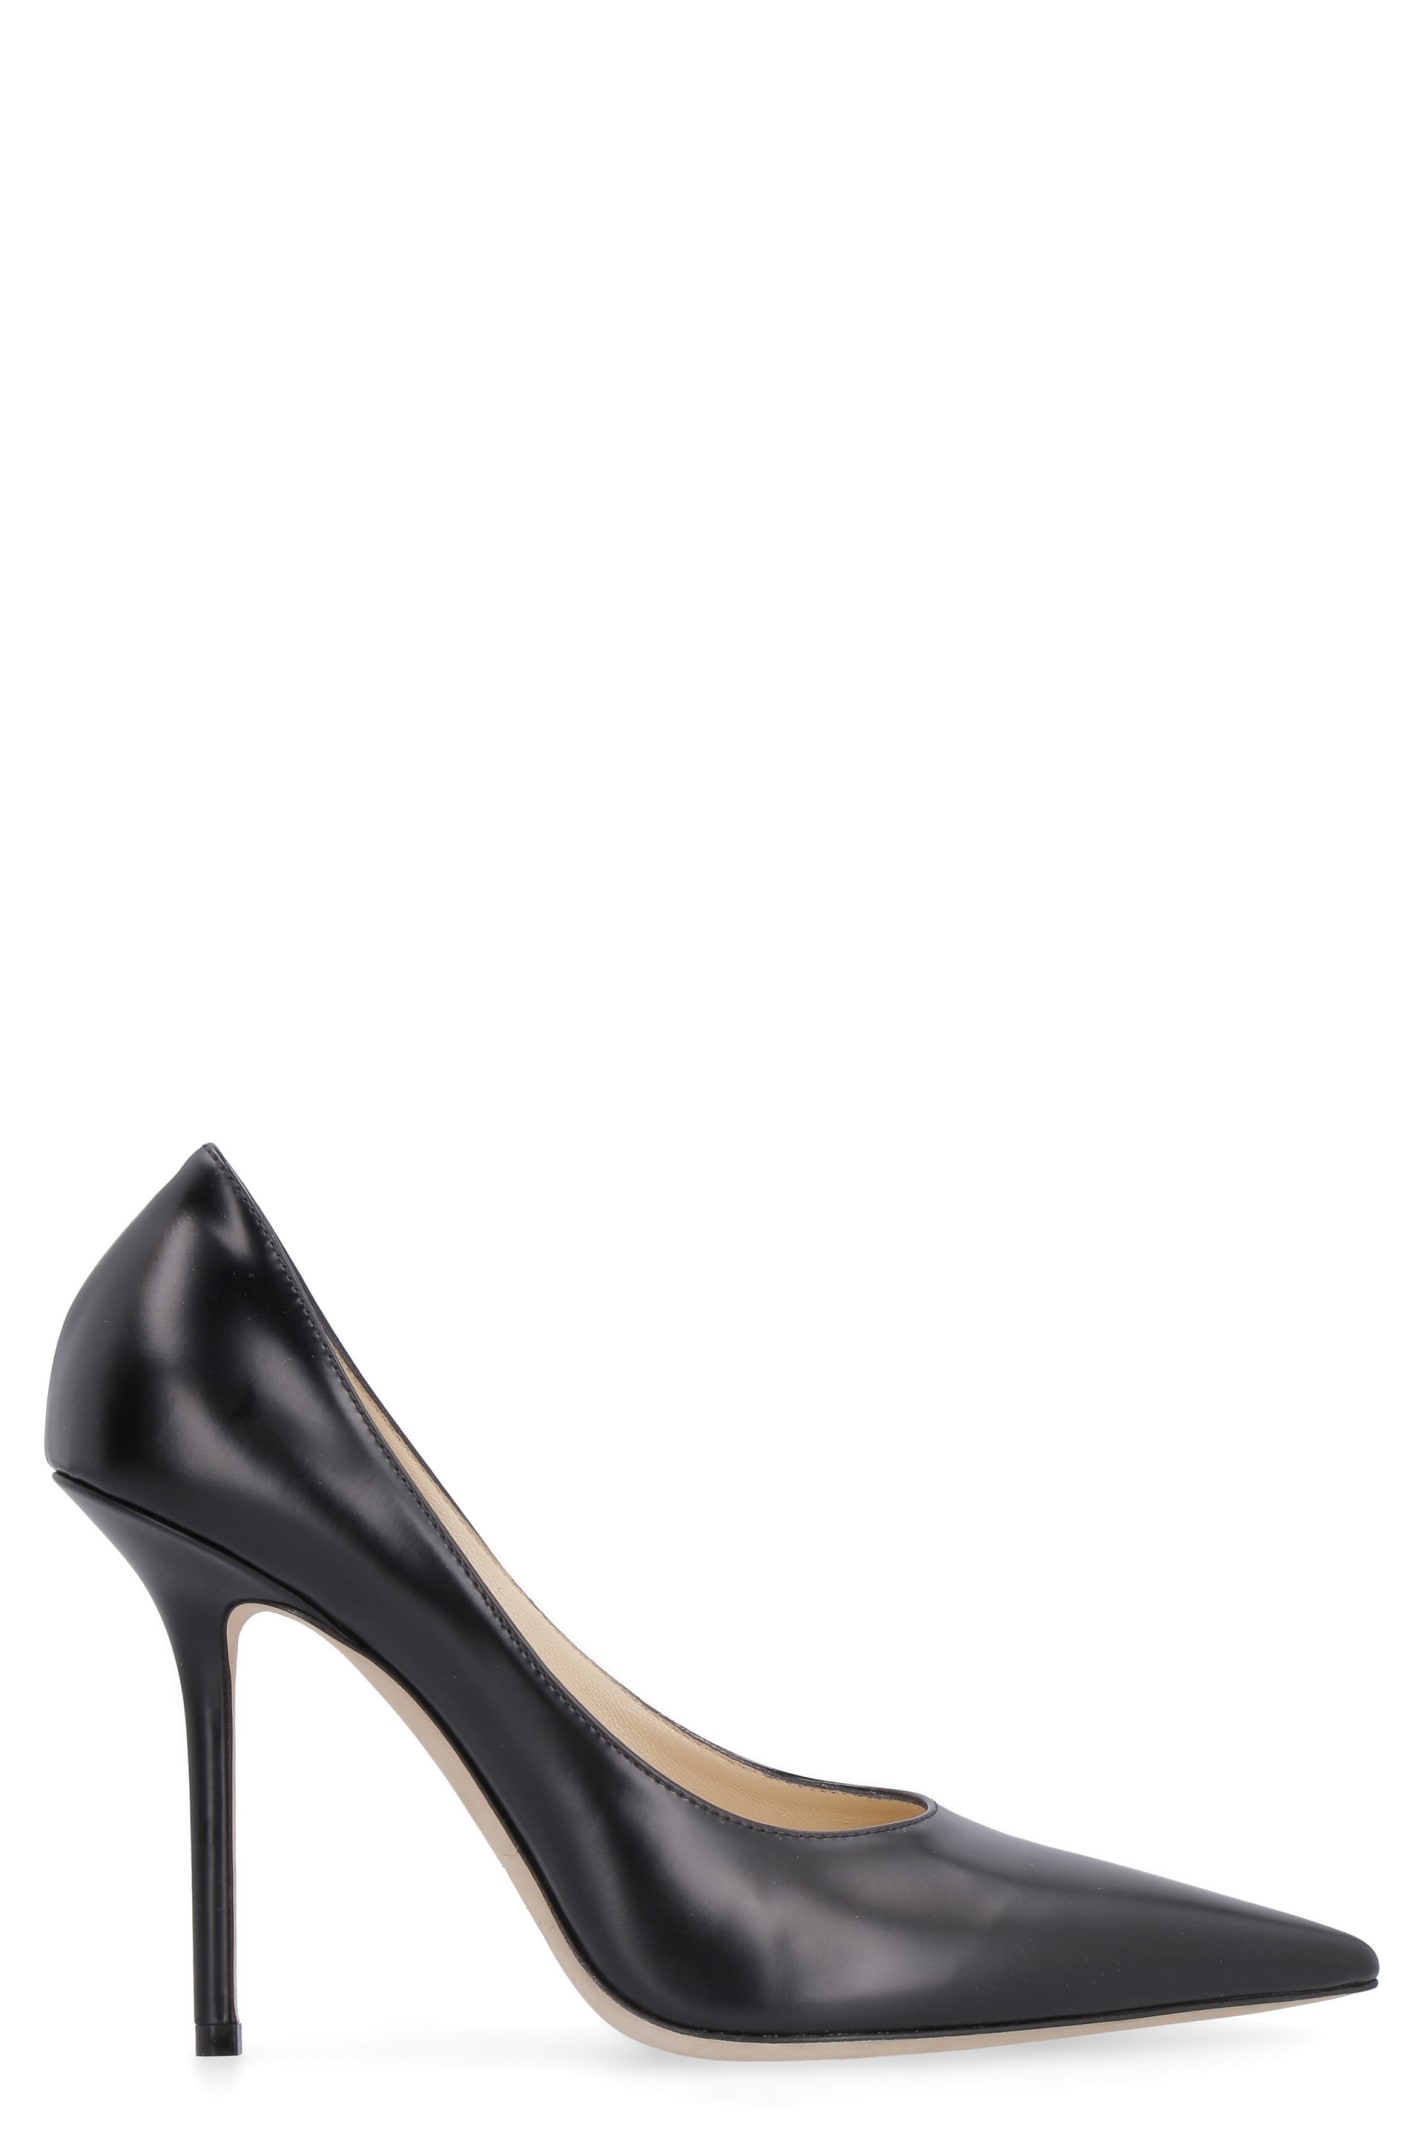 Buy Jimmy Choo Ava Leather Pointy-toe Pumps online, shop Jimmy Choo shoes with free shipping